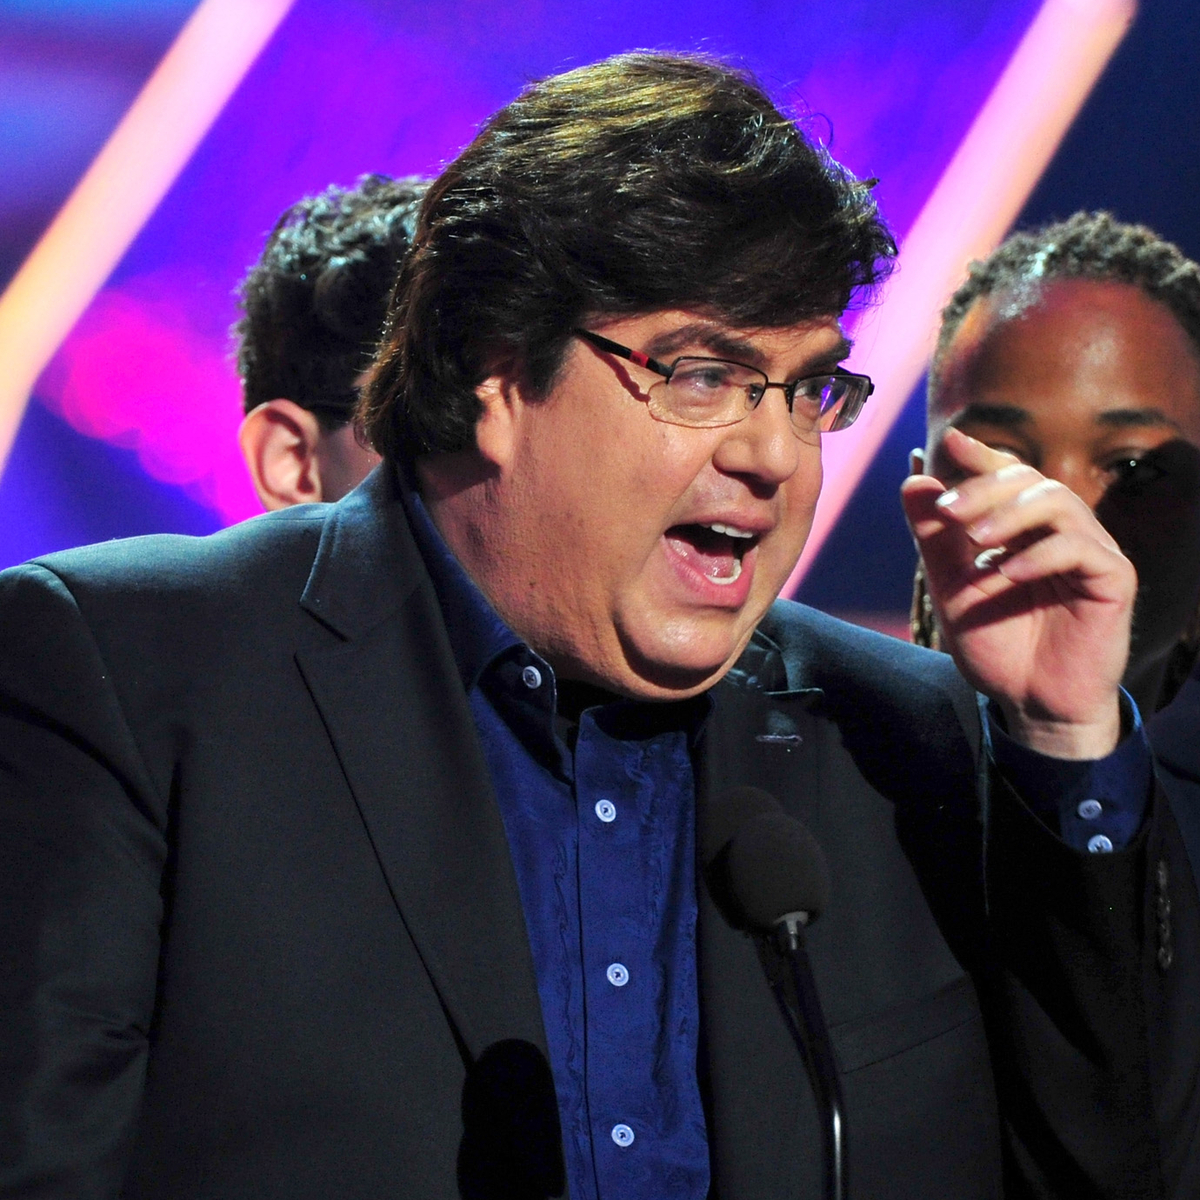 Dan Schneider Sues Quiet on Set Producers for Allegedly Portraying Him as Child Sexual Abuser